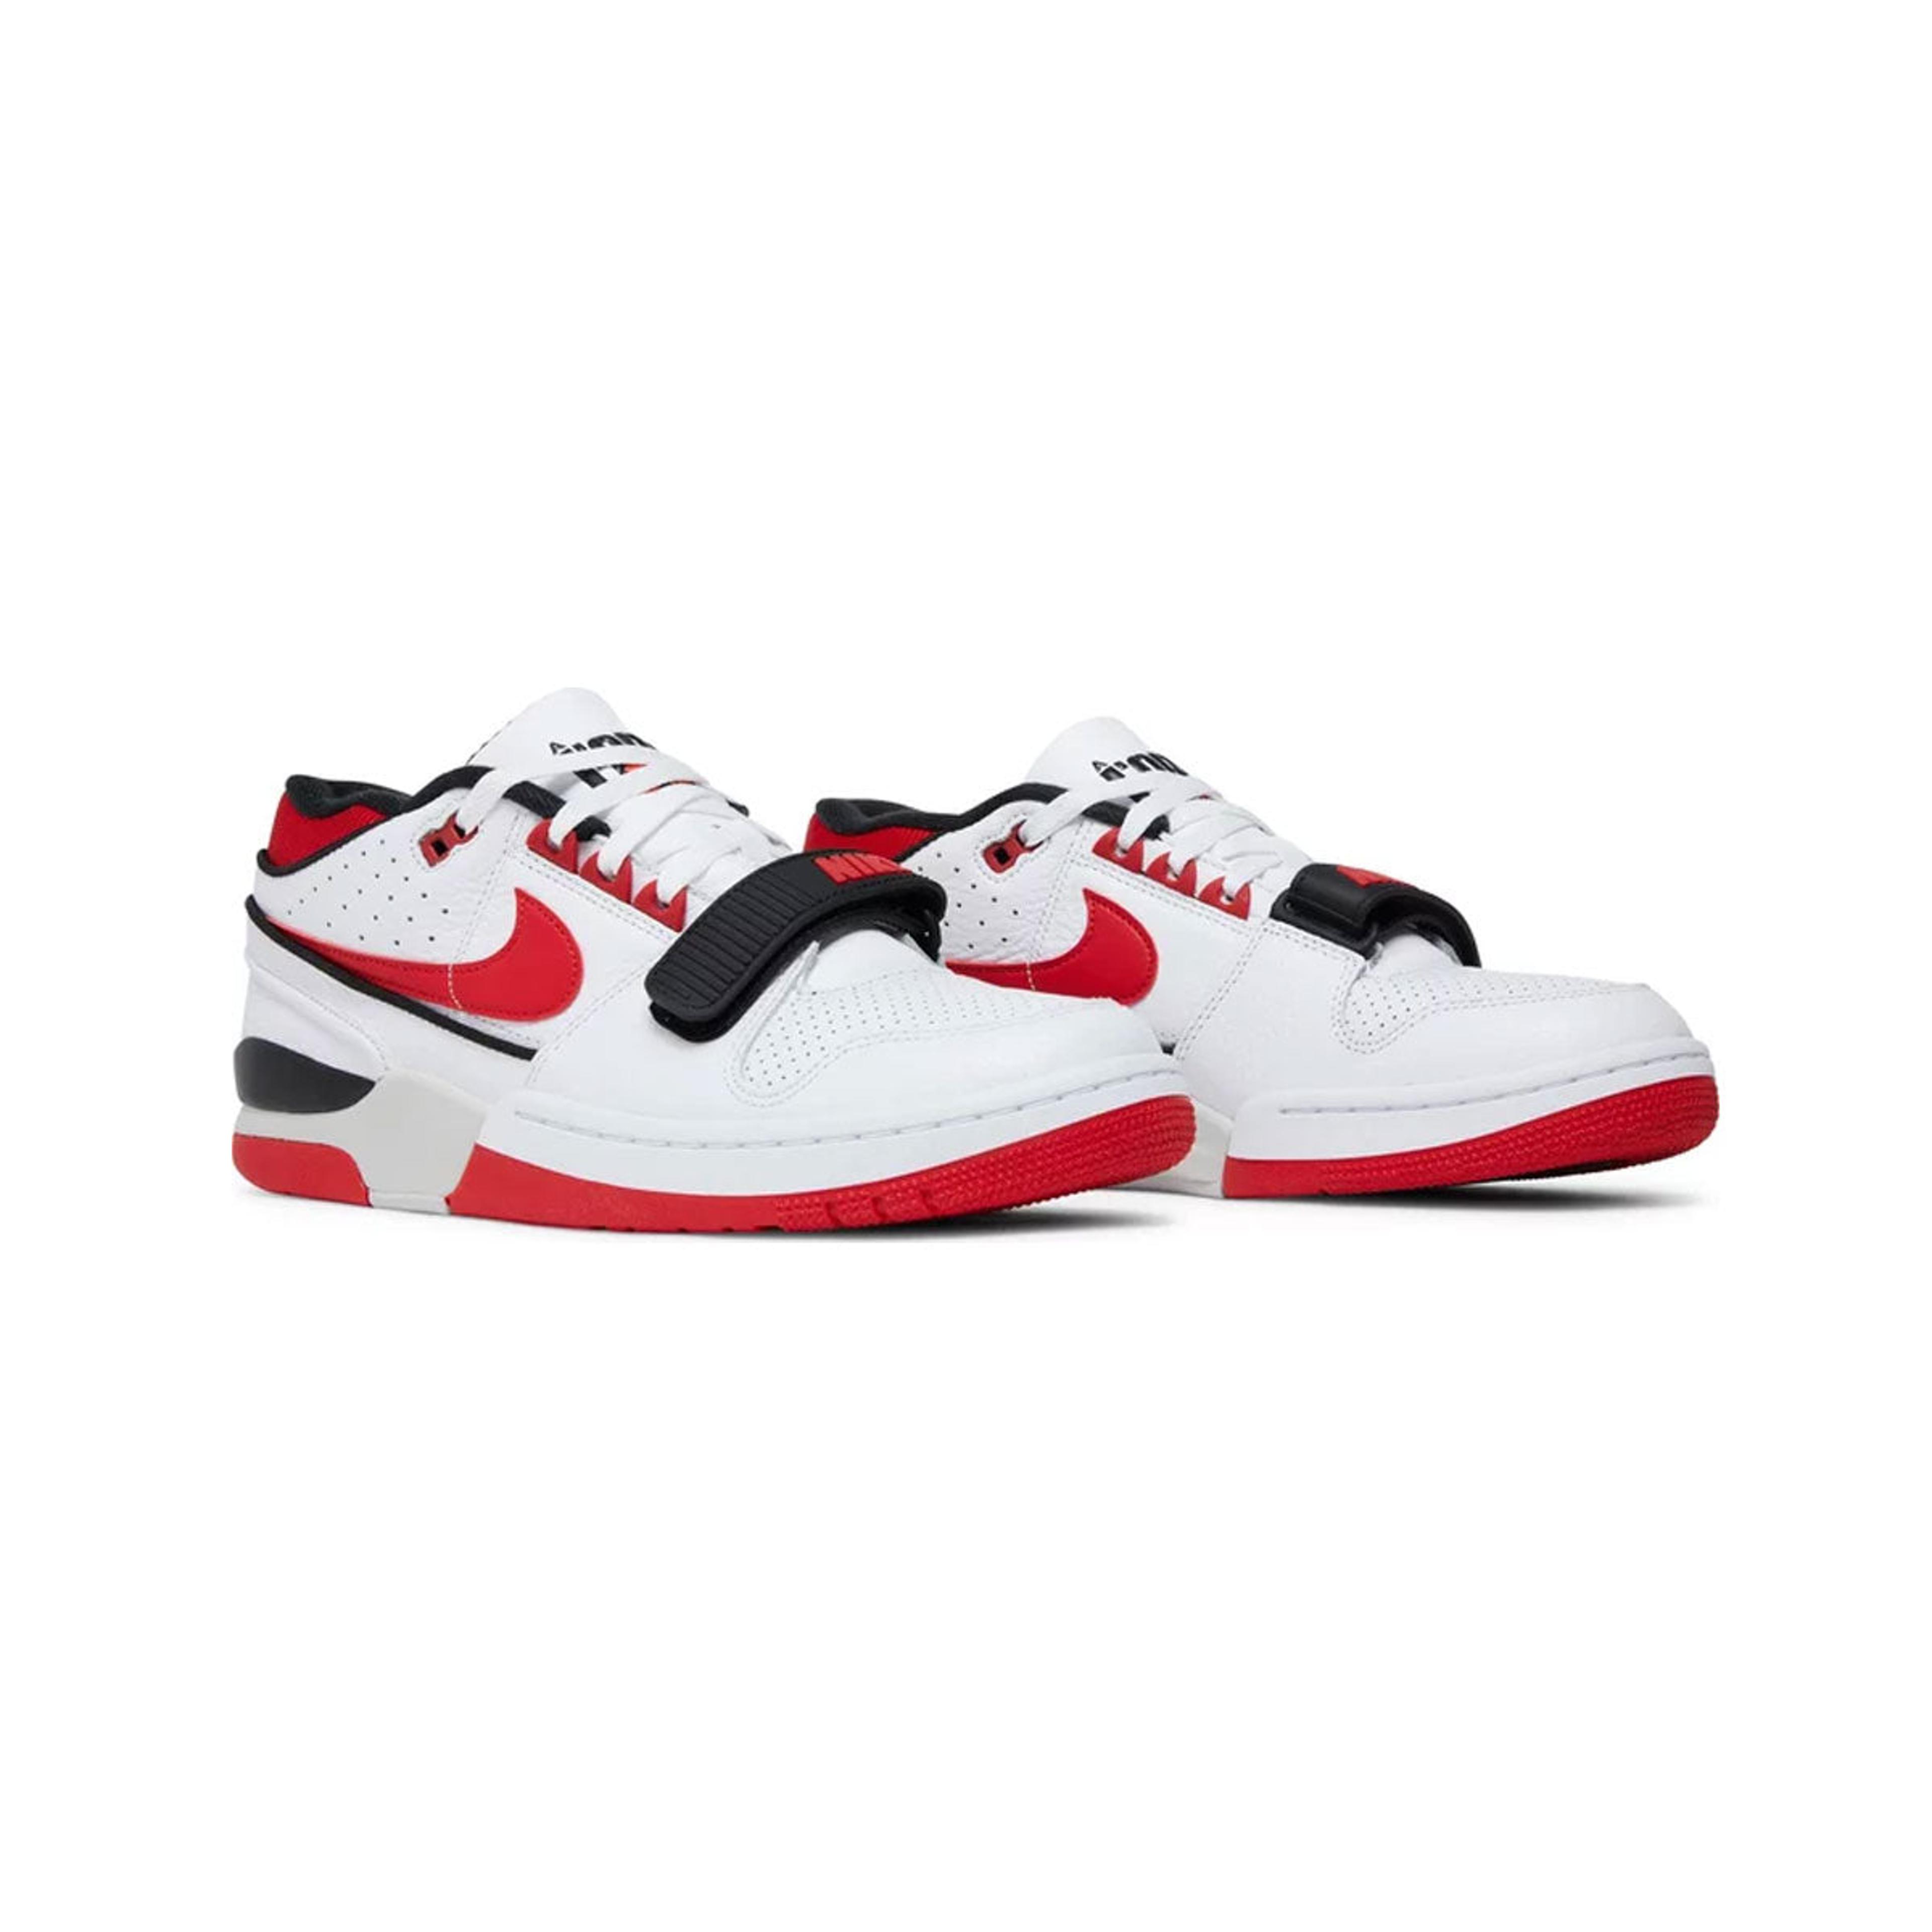 Alternate View 1 of Nike Air Alpha Force 88 University Red